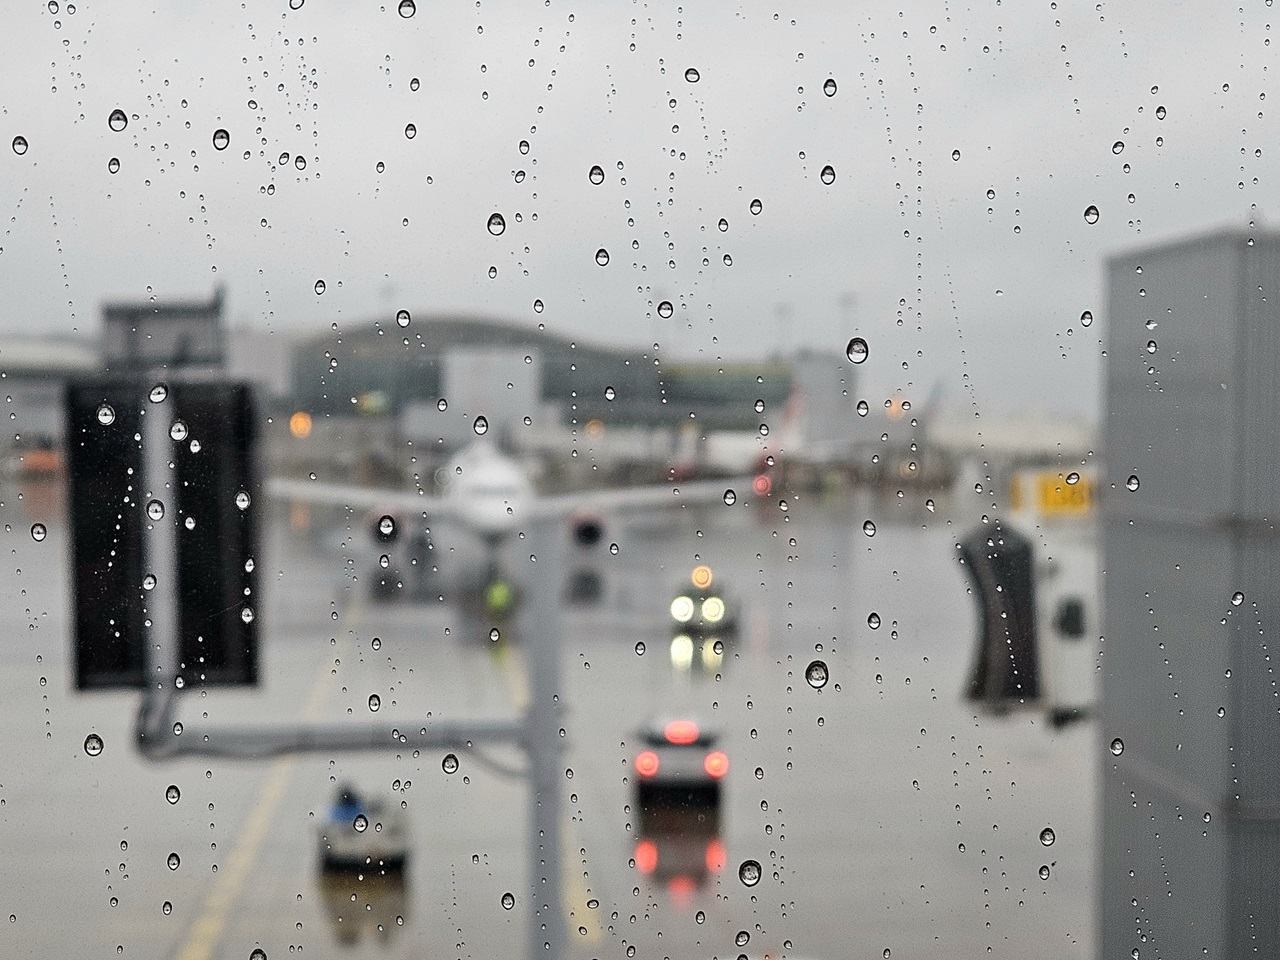 Florida flights delayed out of Pearson in Mississauga.